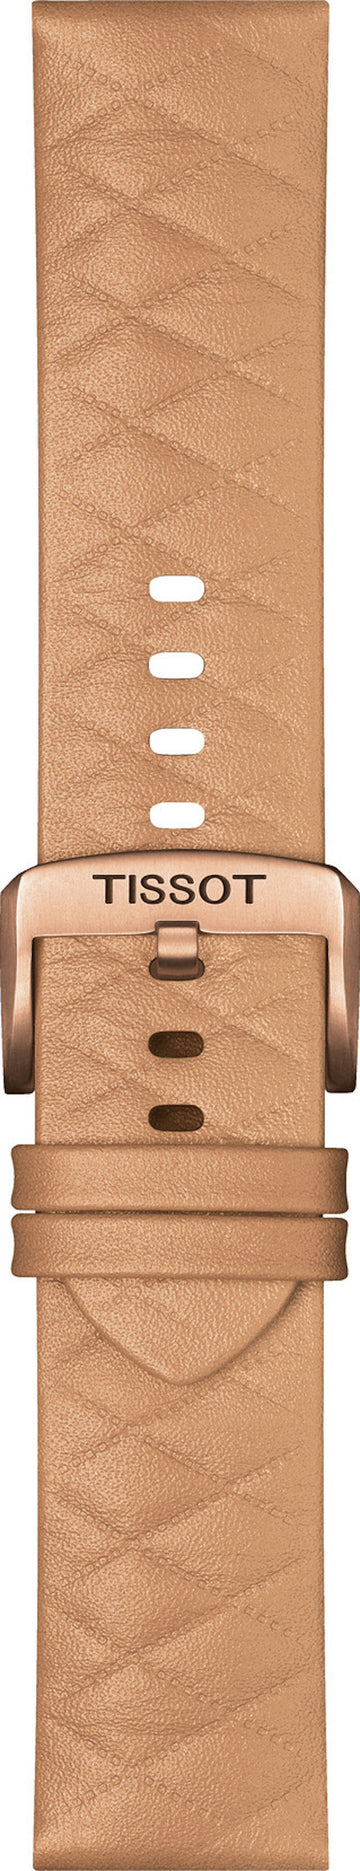 Tissot 23mm Rose Gold Leather Strap Watch Band - WATCHBAND EXPERT